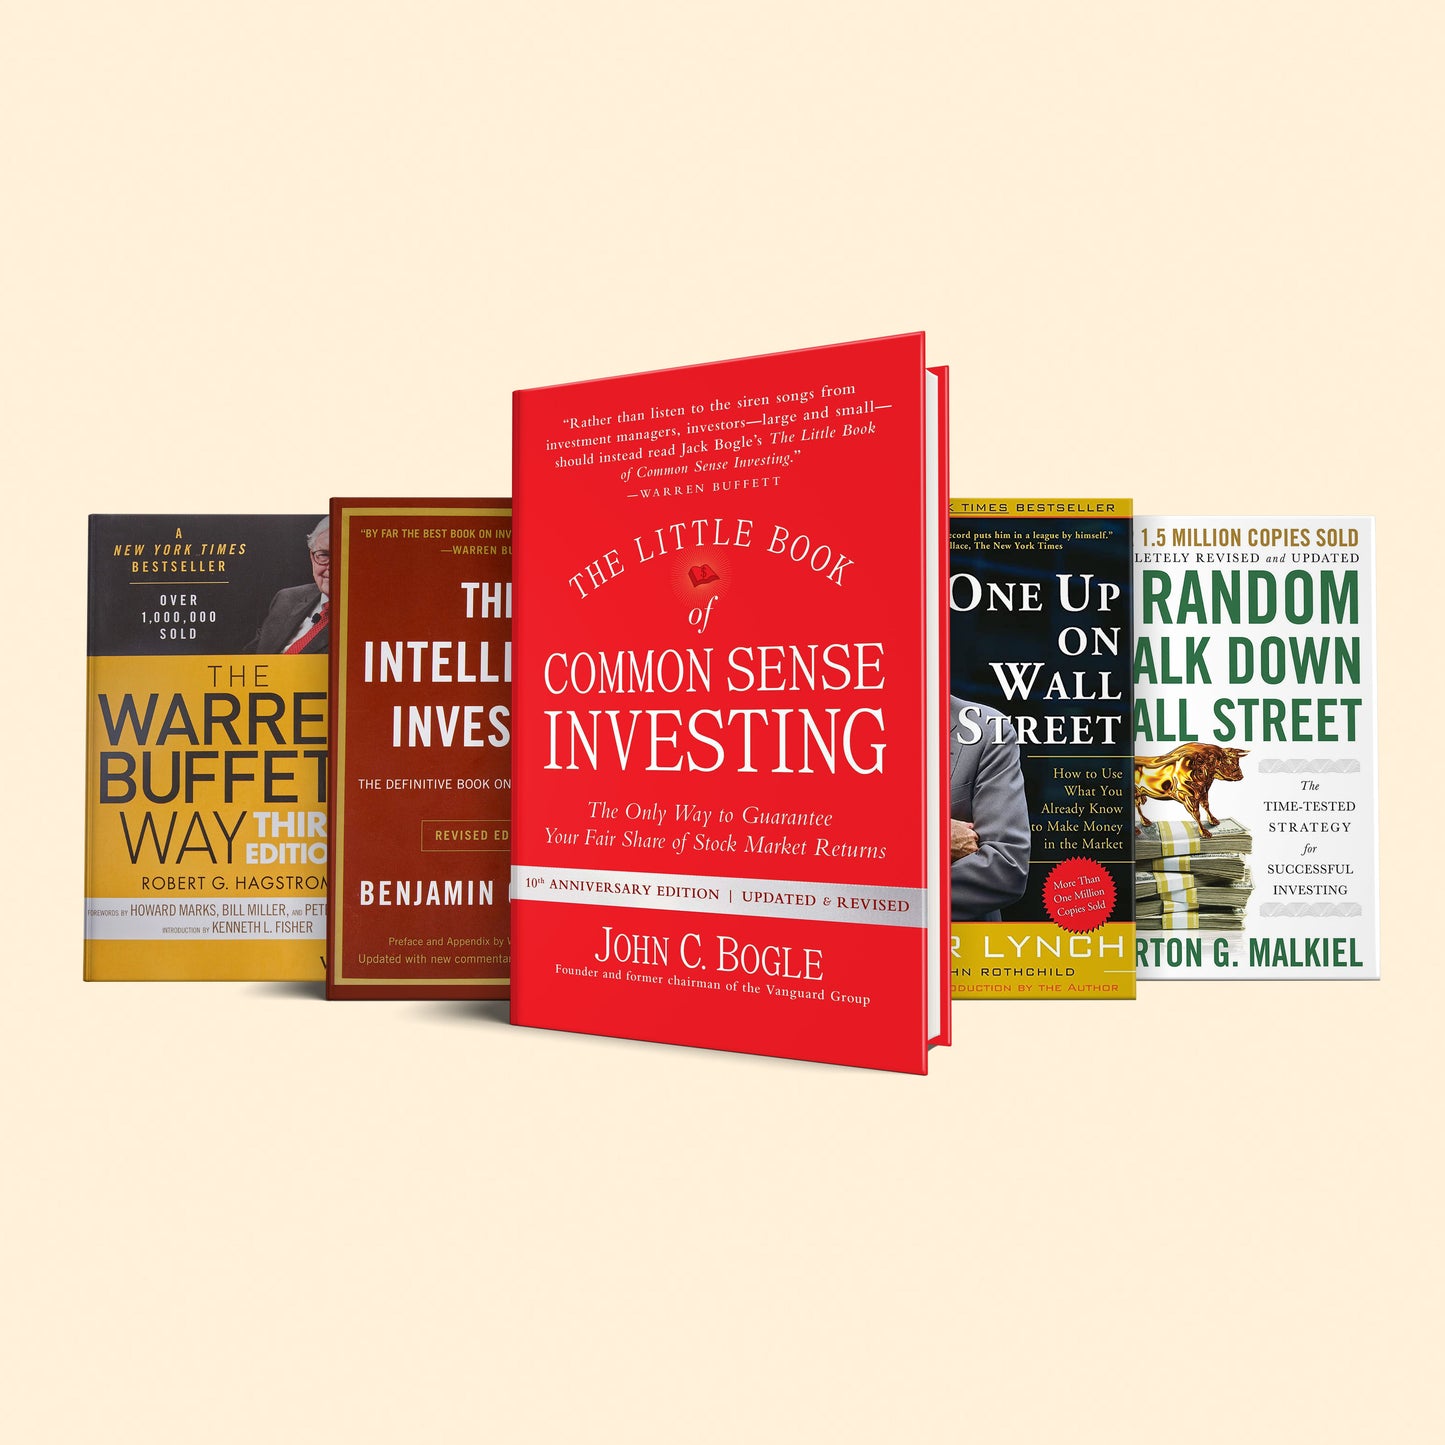 5 Books to introduce to stock market: One up on wall street, The Little Book of Common Sense, The Warren Buffett Way, The Intelligent Investor, A Random Walk Down wall street